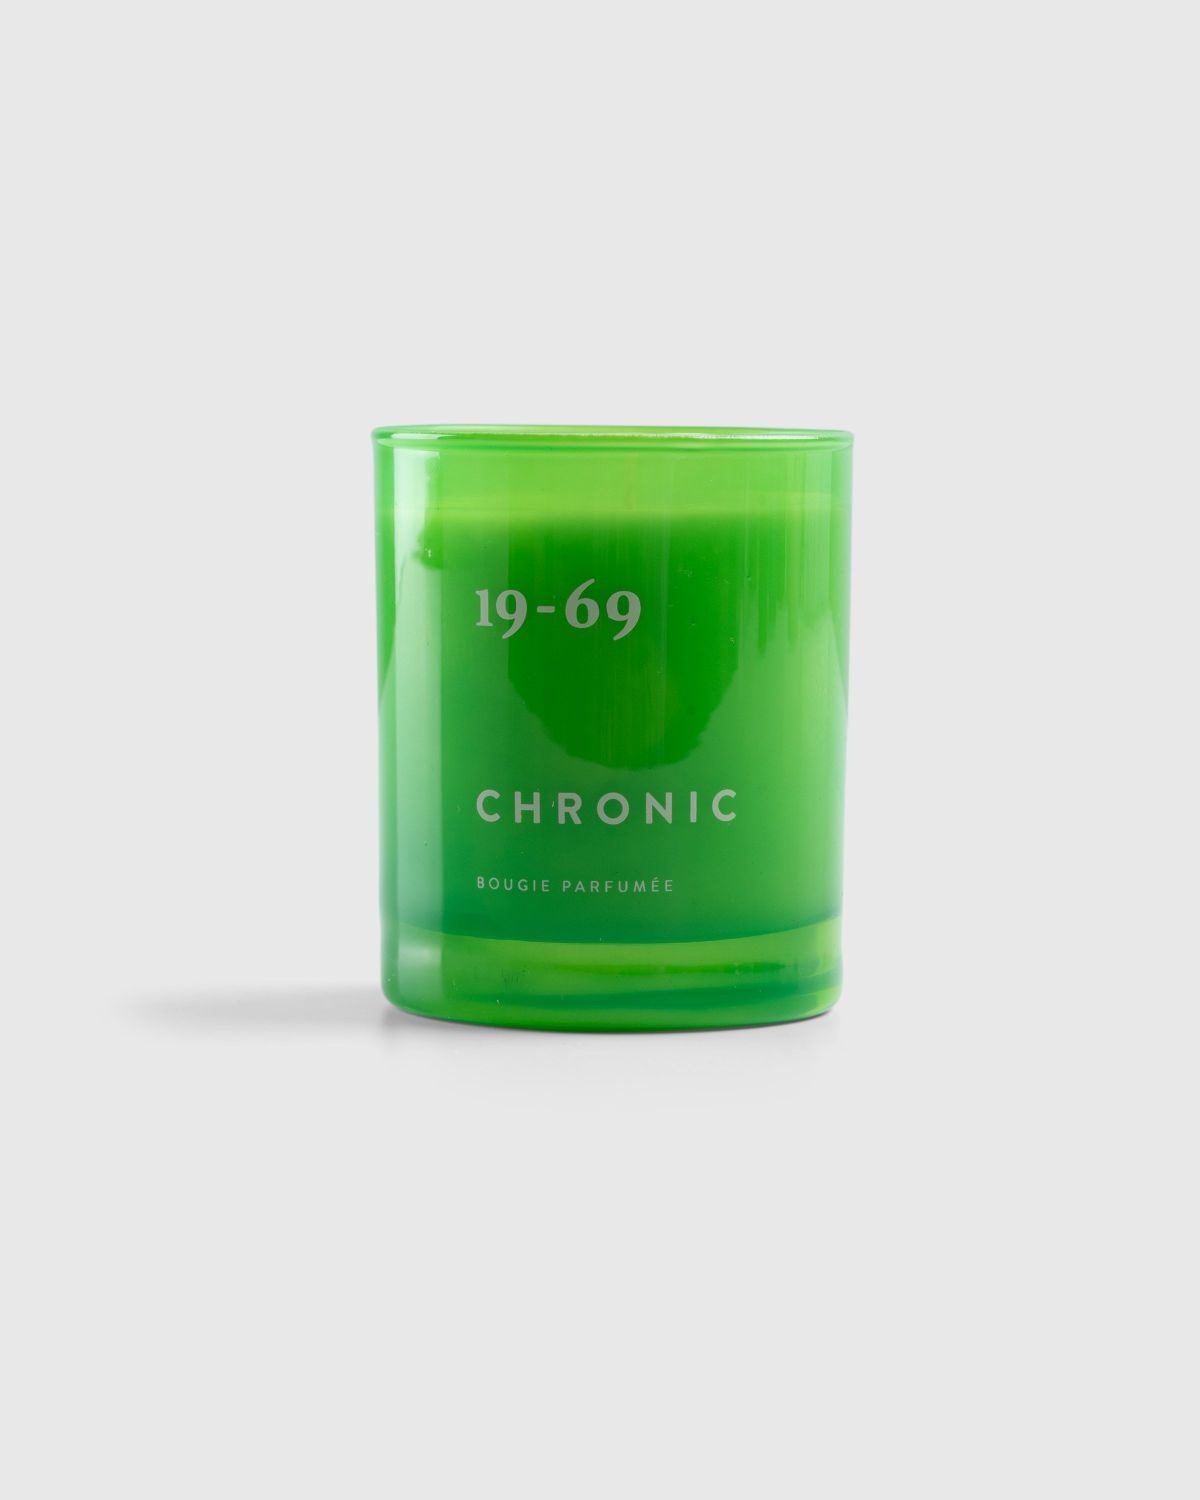 19-69 – Chronic BP Candle - Candles & Fragrances - Green - Image 1